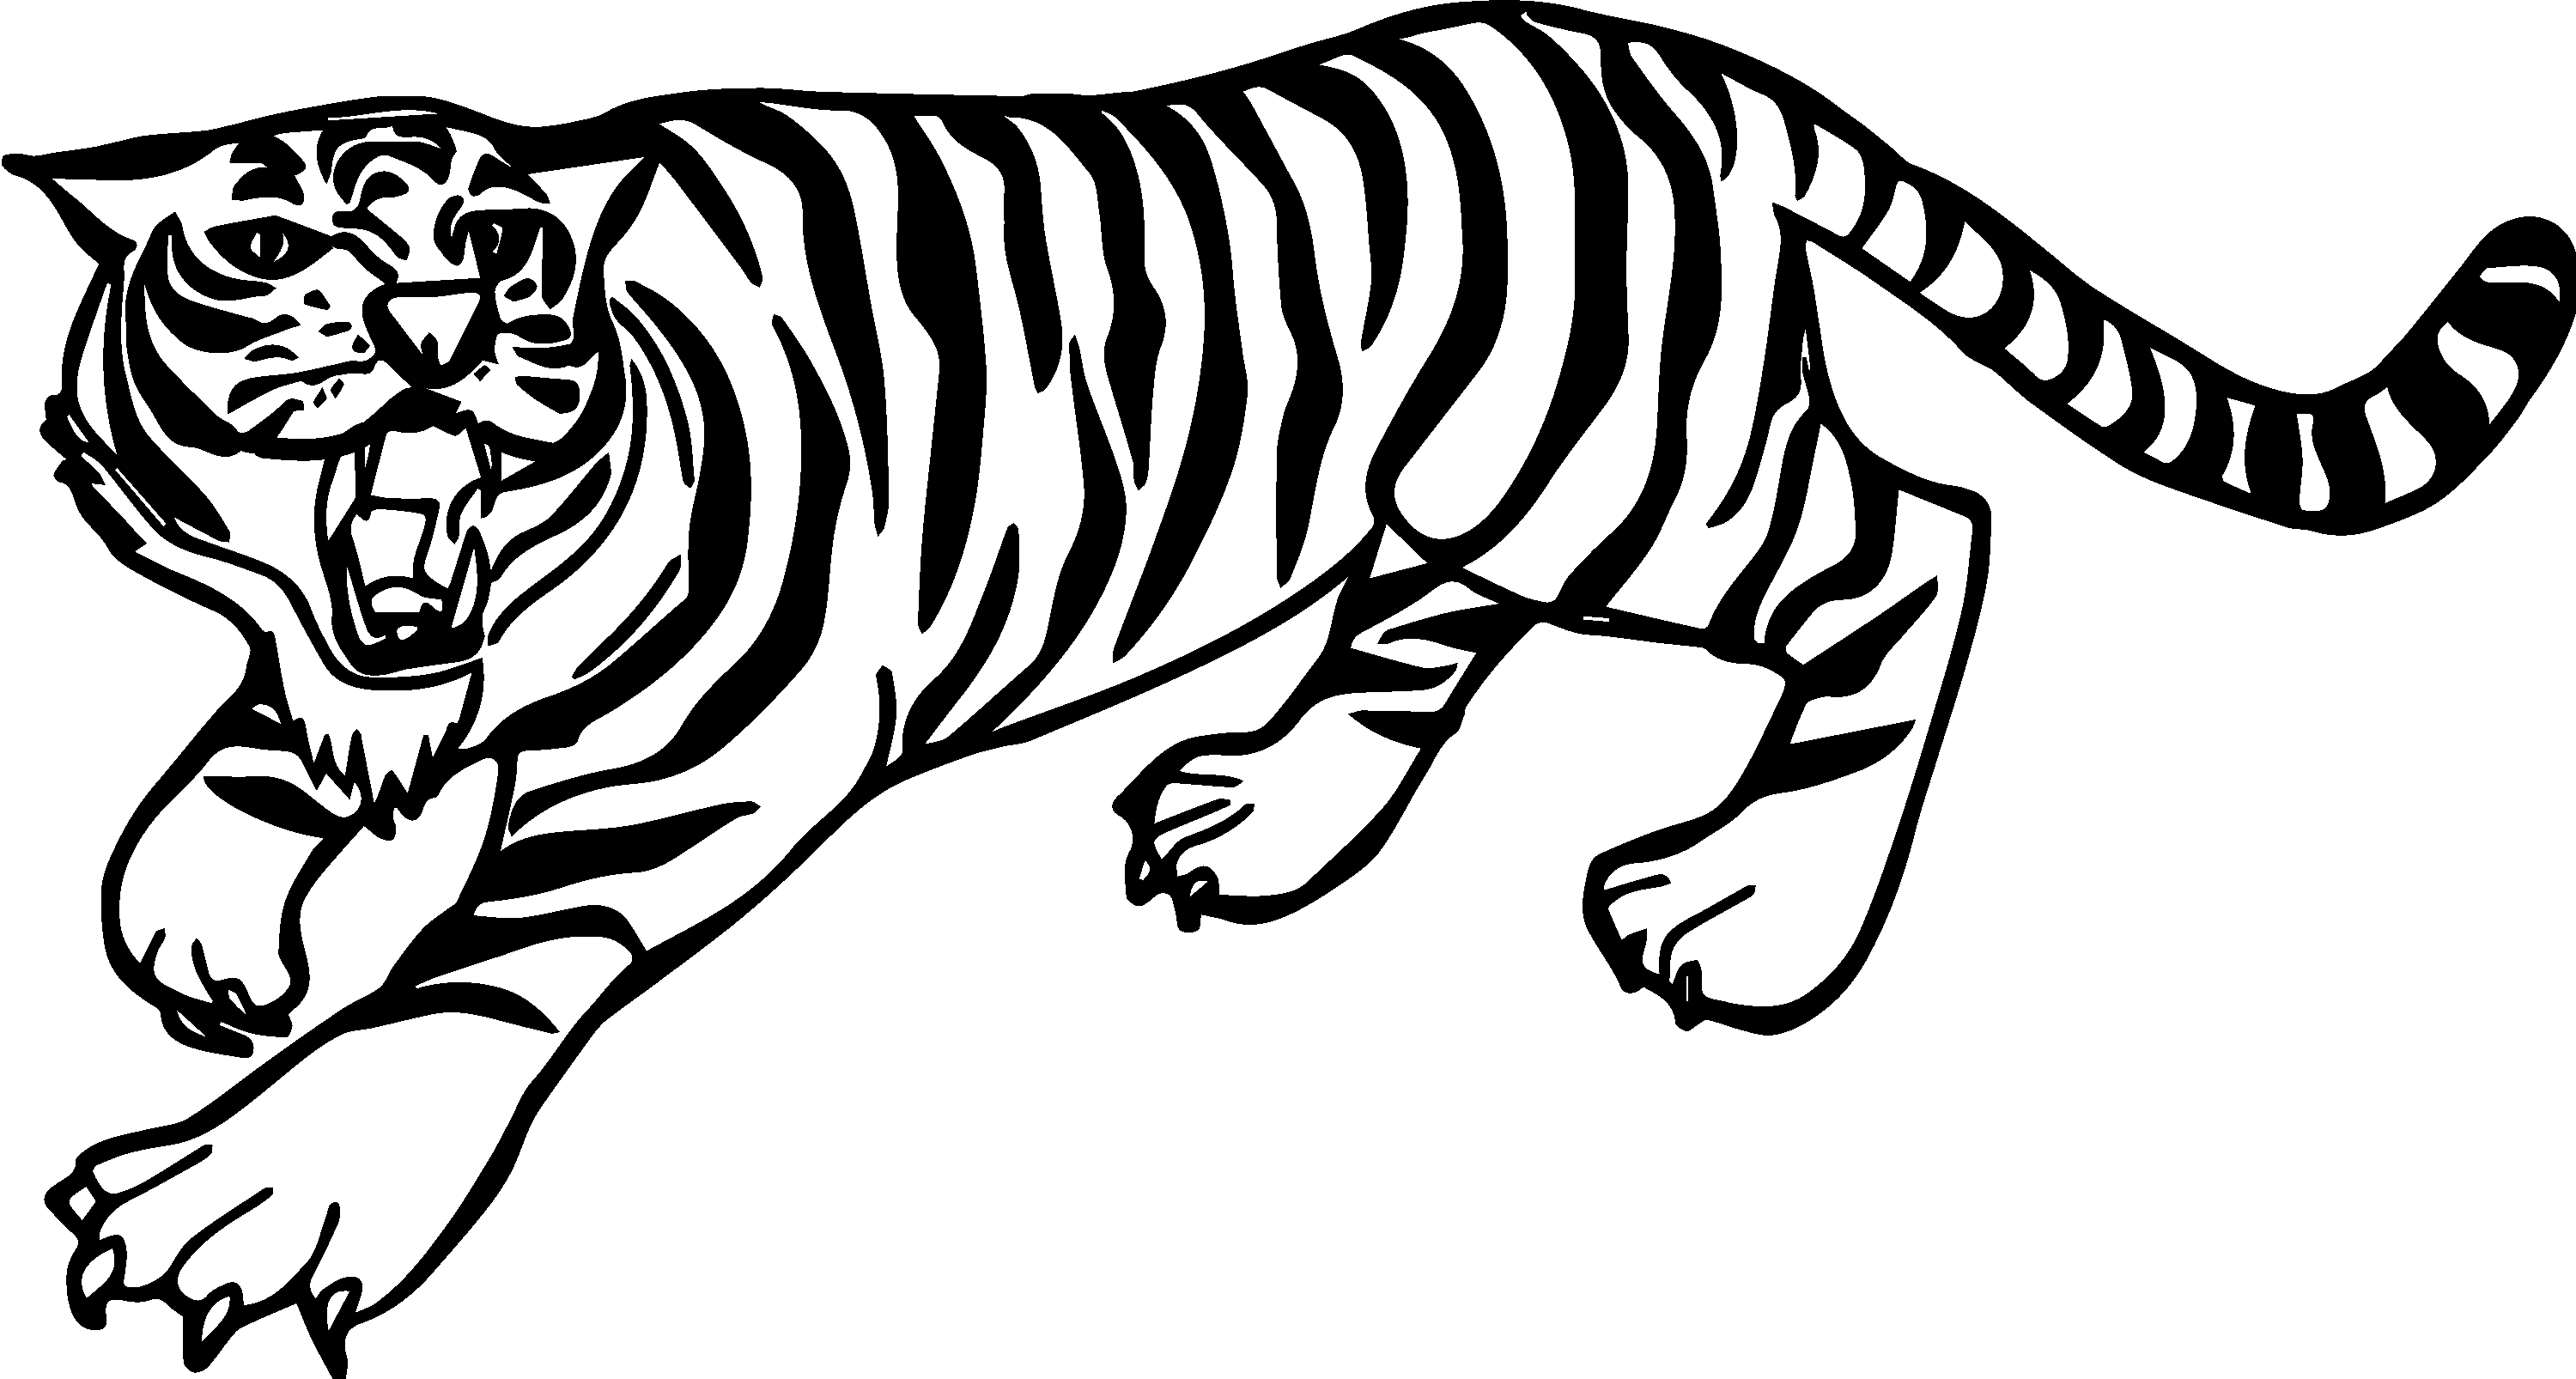 tiger colouring pictures tiger coloring pages getcoloringpagescom colouring pictures tiger 